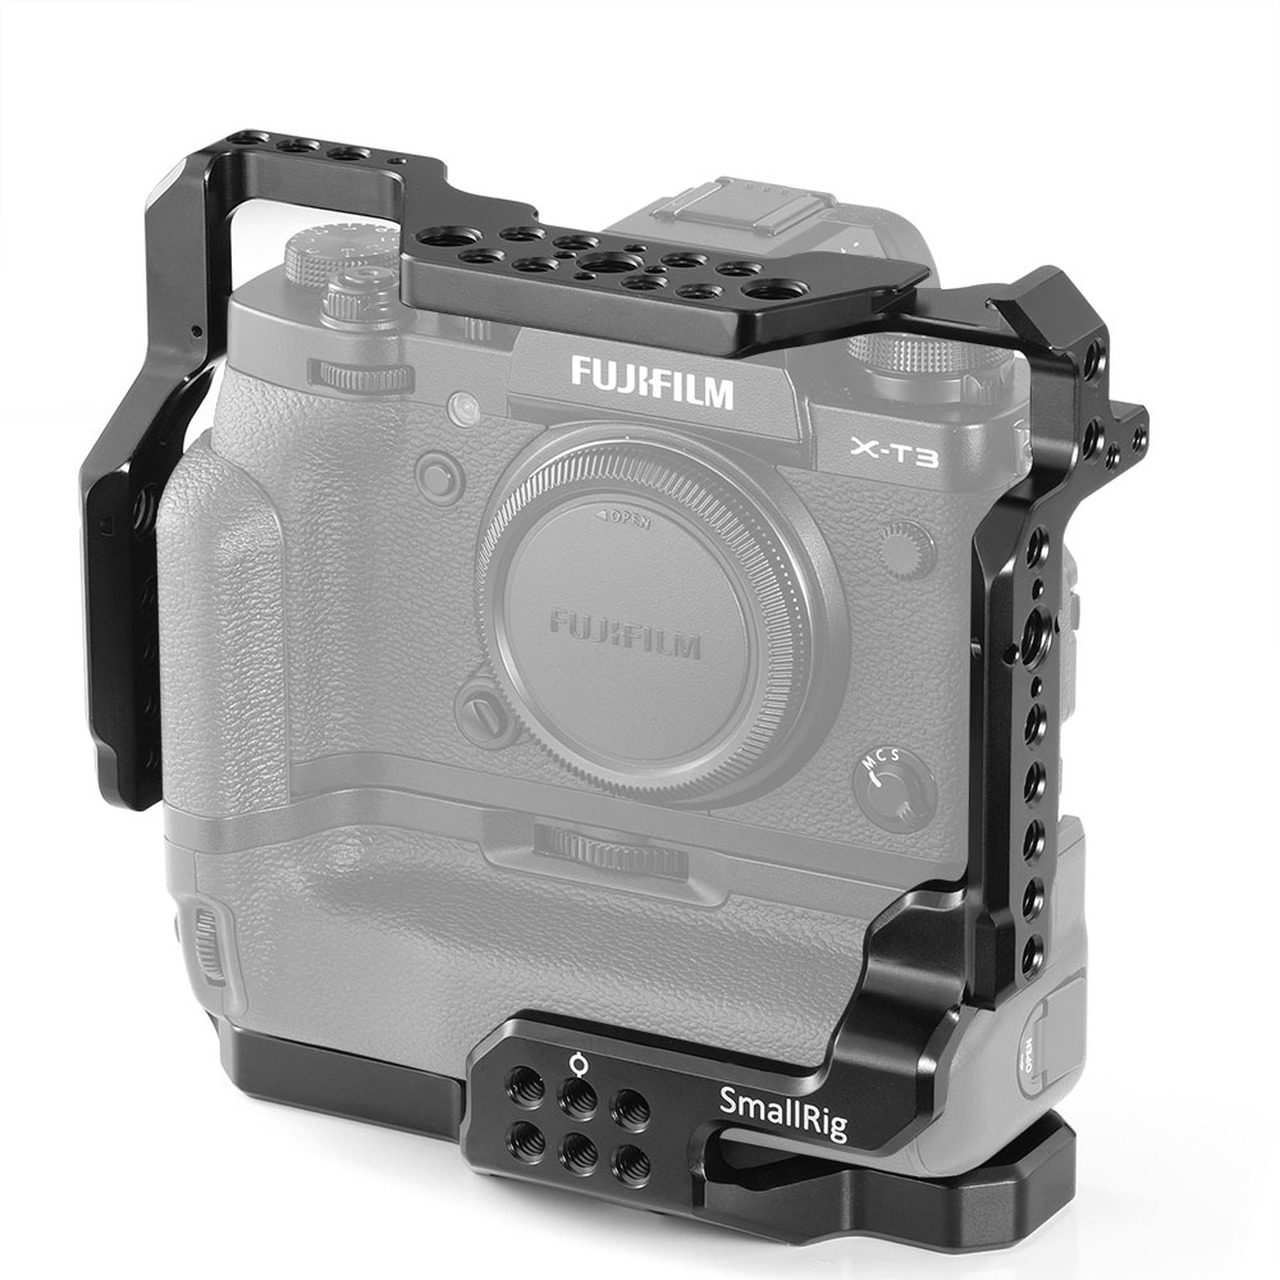 elk duisternis levering aan huis SmallRig Cage for Fujifilm X-T3 Camera 2228 - Direct Imaging & Sound Sdn Bhd